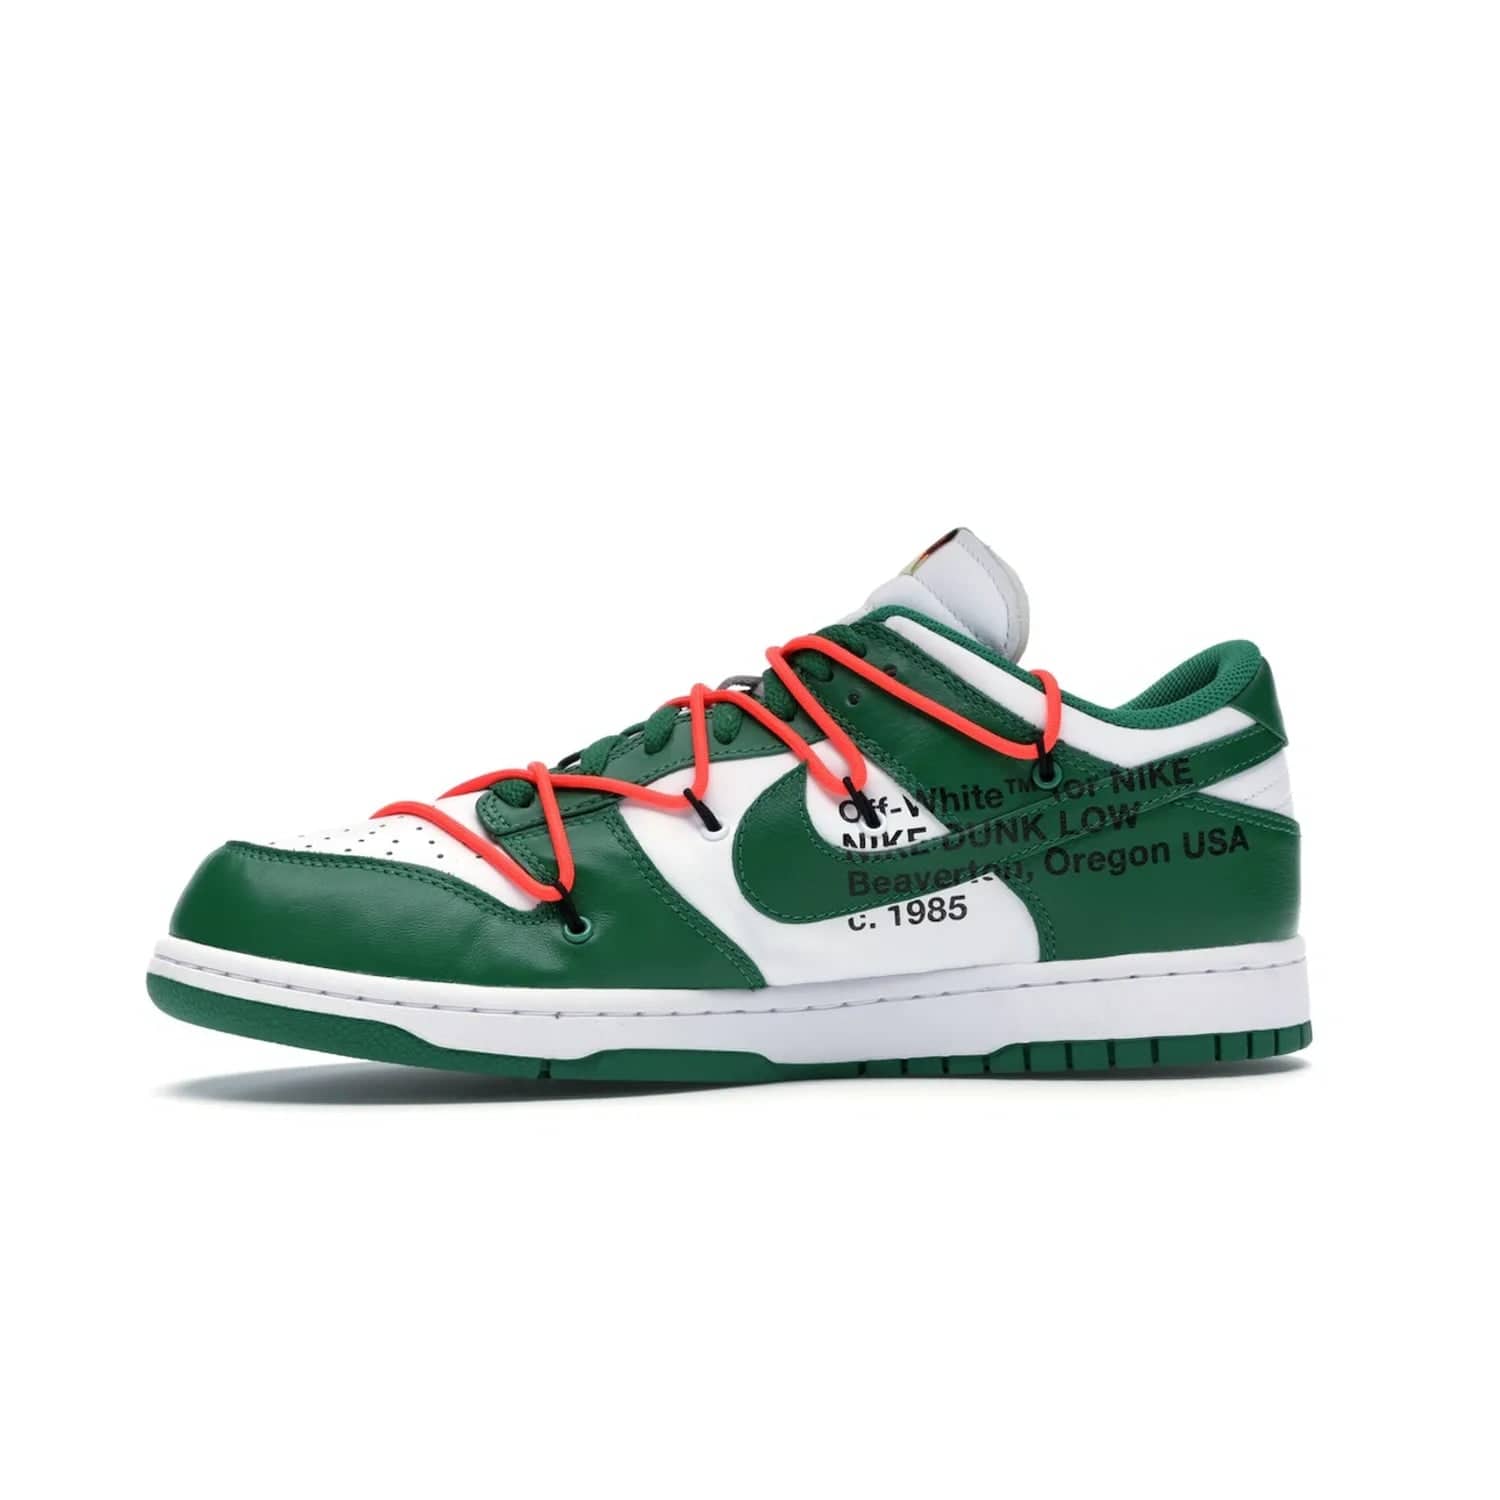 Nike Dunk Low Off-White Pine Green - Image 18 - Only at www.BallersClubKickz.com - The Nike Dunk Low Off-White Pine Green combines classic 1980s style with modern-day design. Featuring white leather uppers and pine green overlays, these classic kicks feature secondary lacing system, zip-ties and signature Off-White text. Releasing in December 2019, these shoes are a timeless classic for any wardrobe.